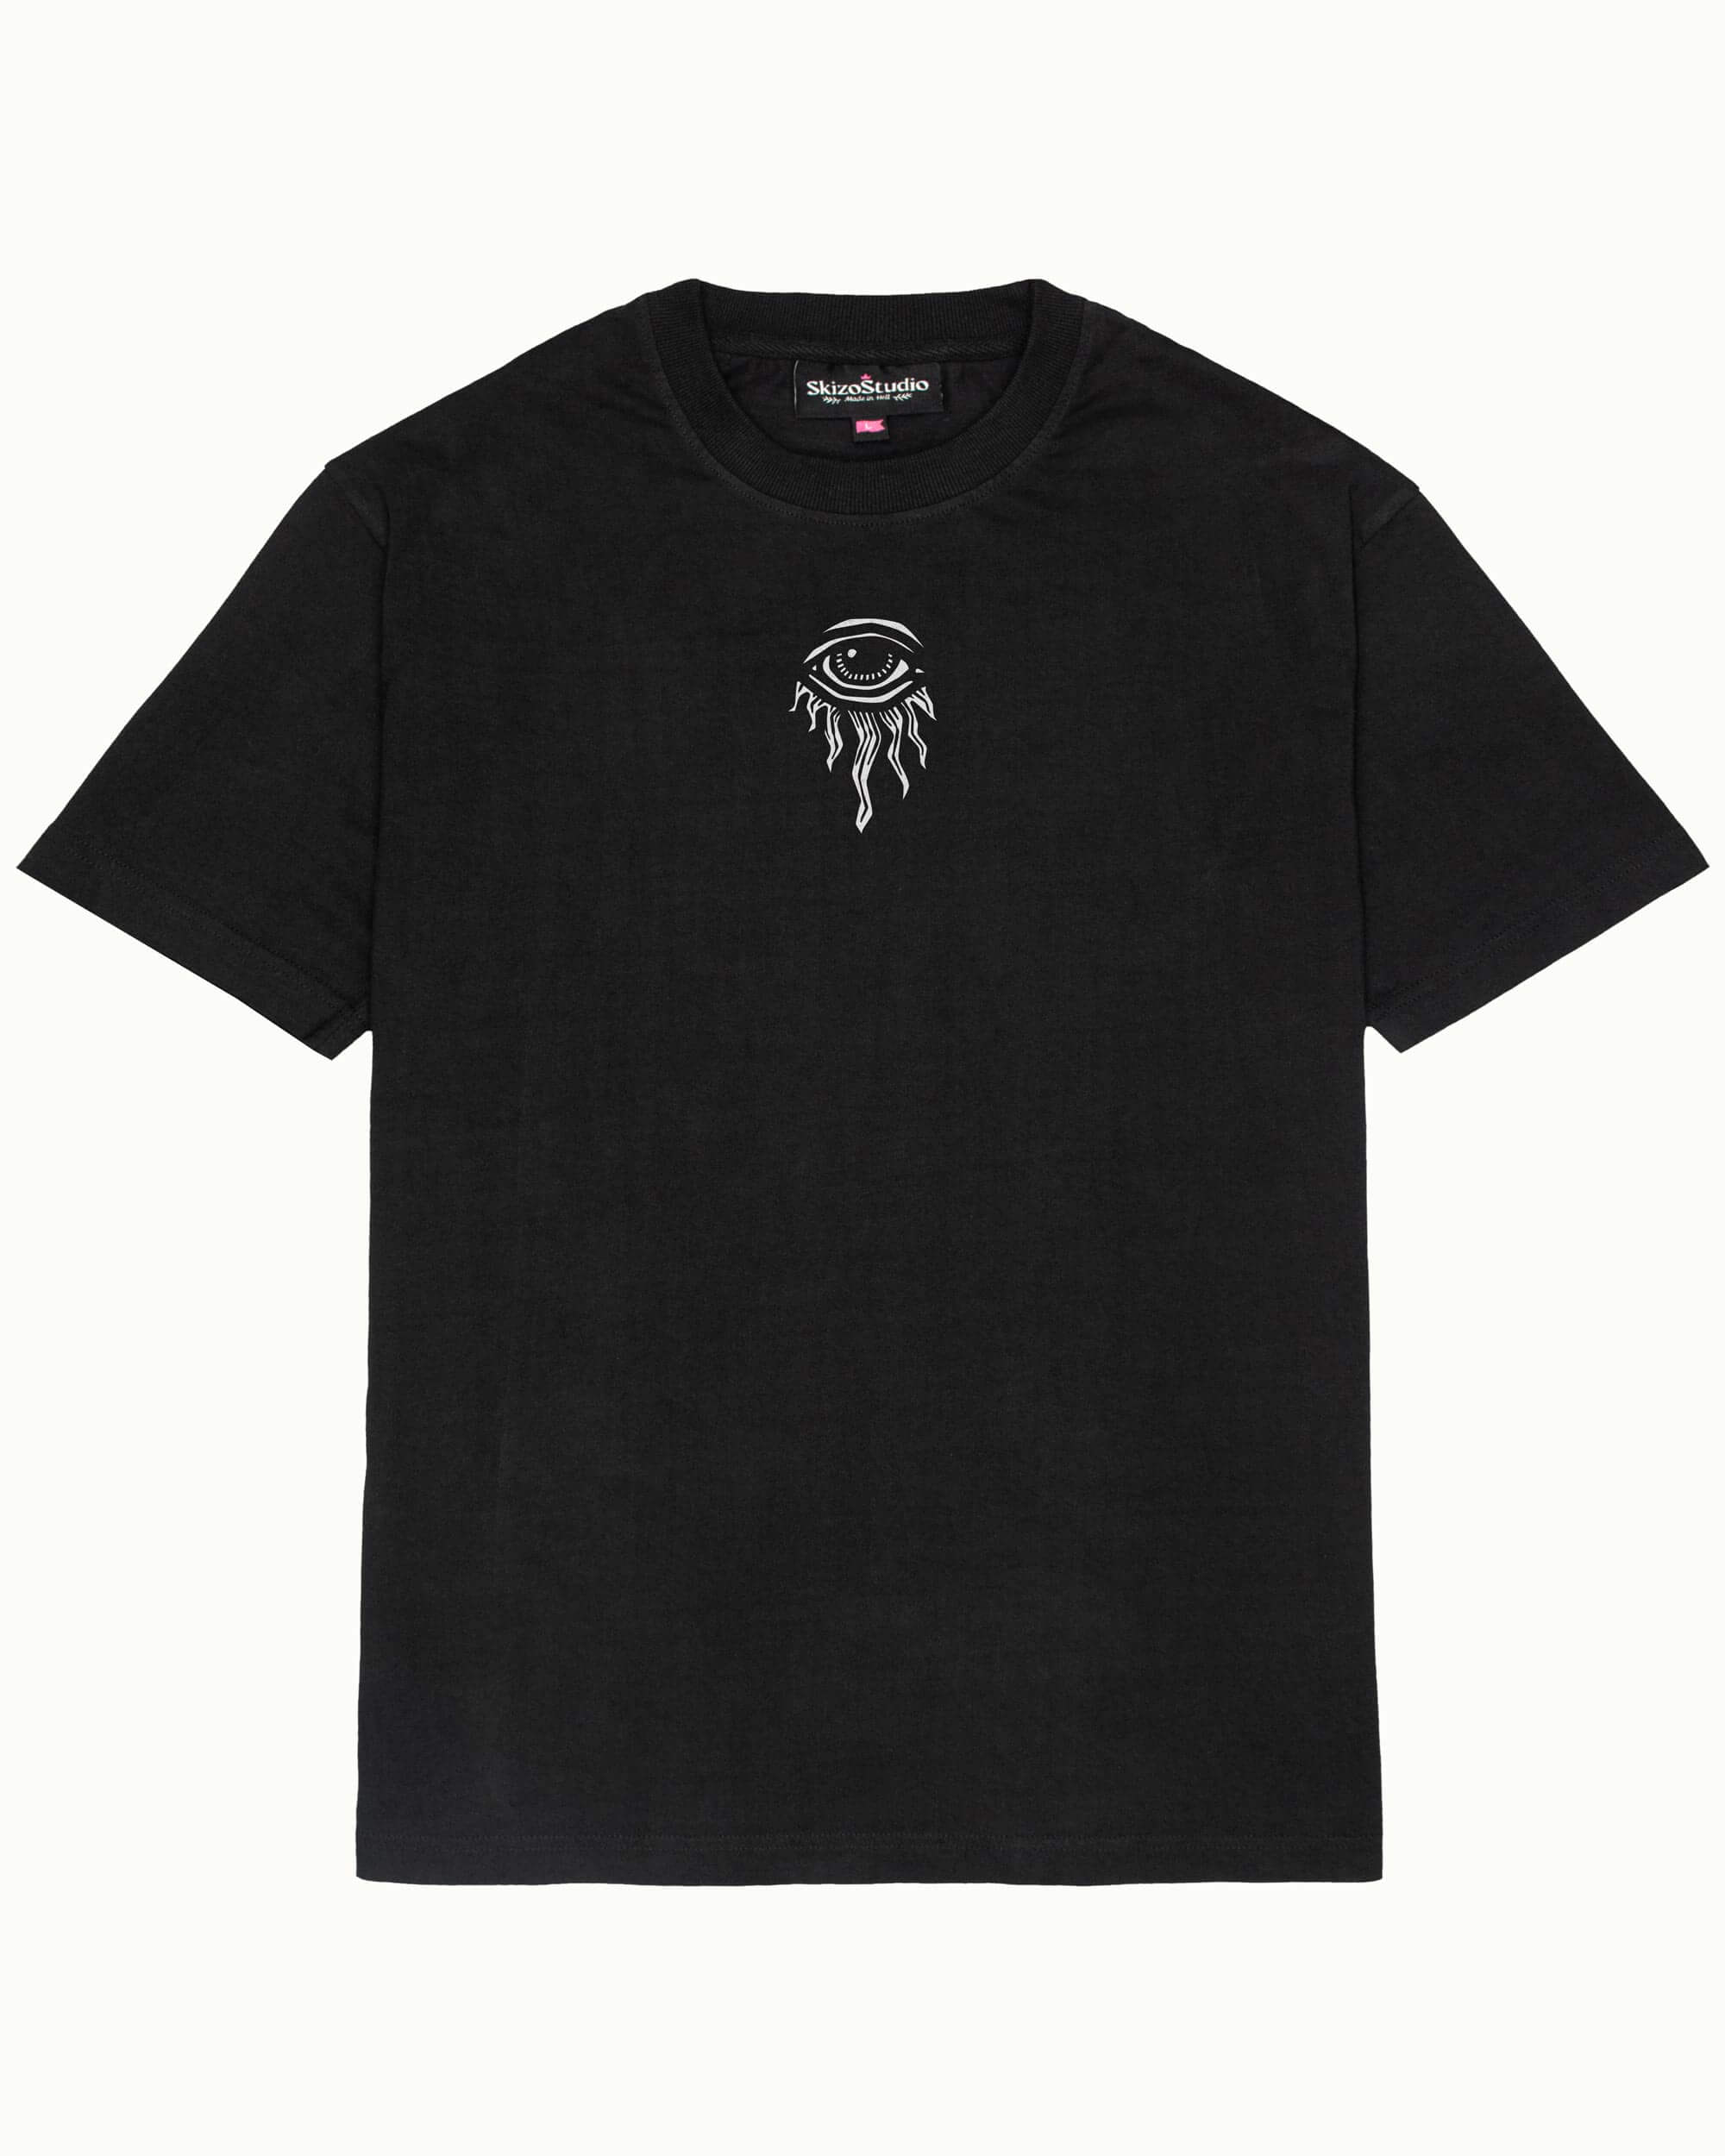 Gates of Hell Tee